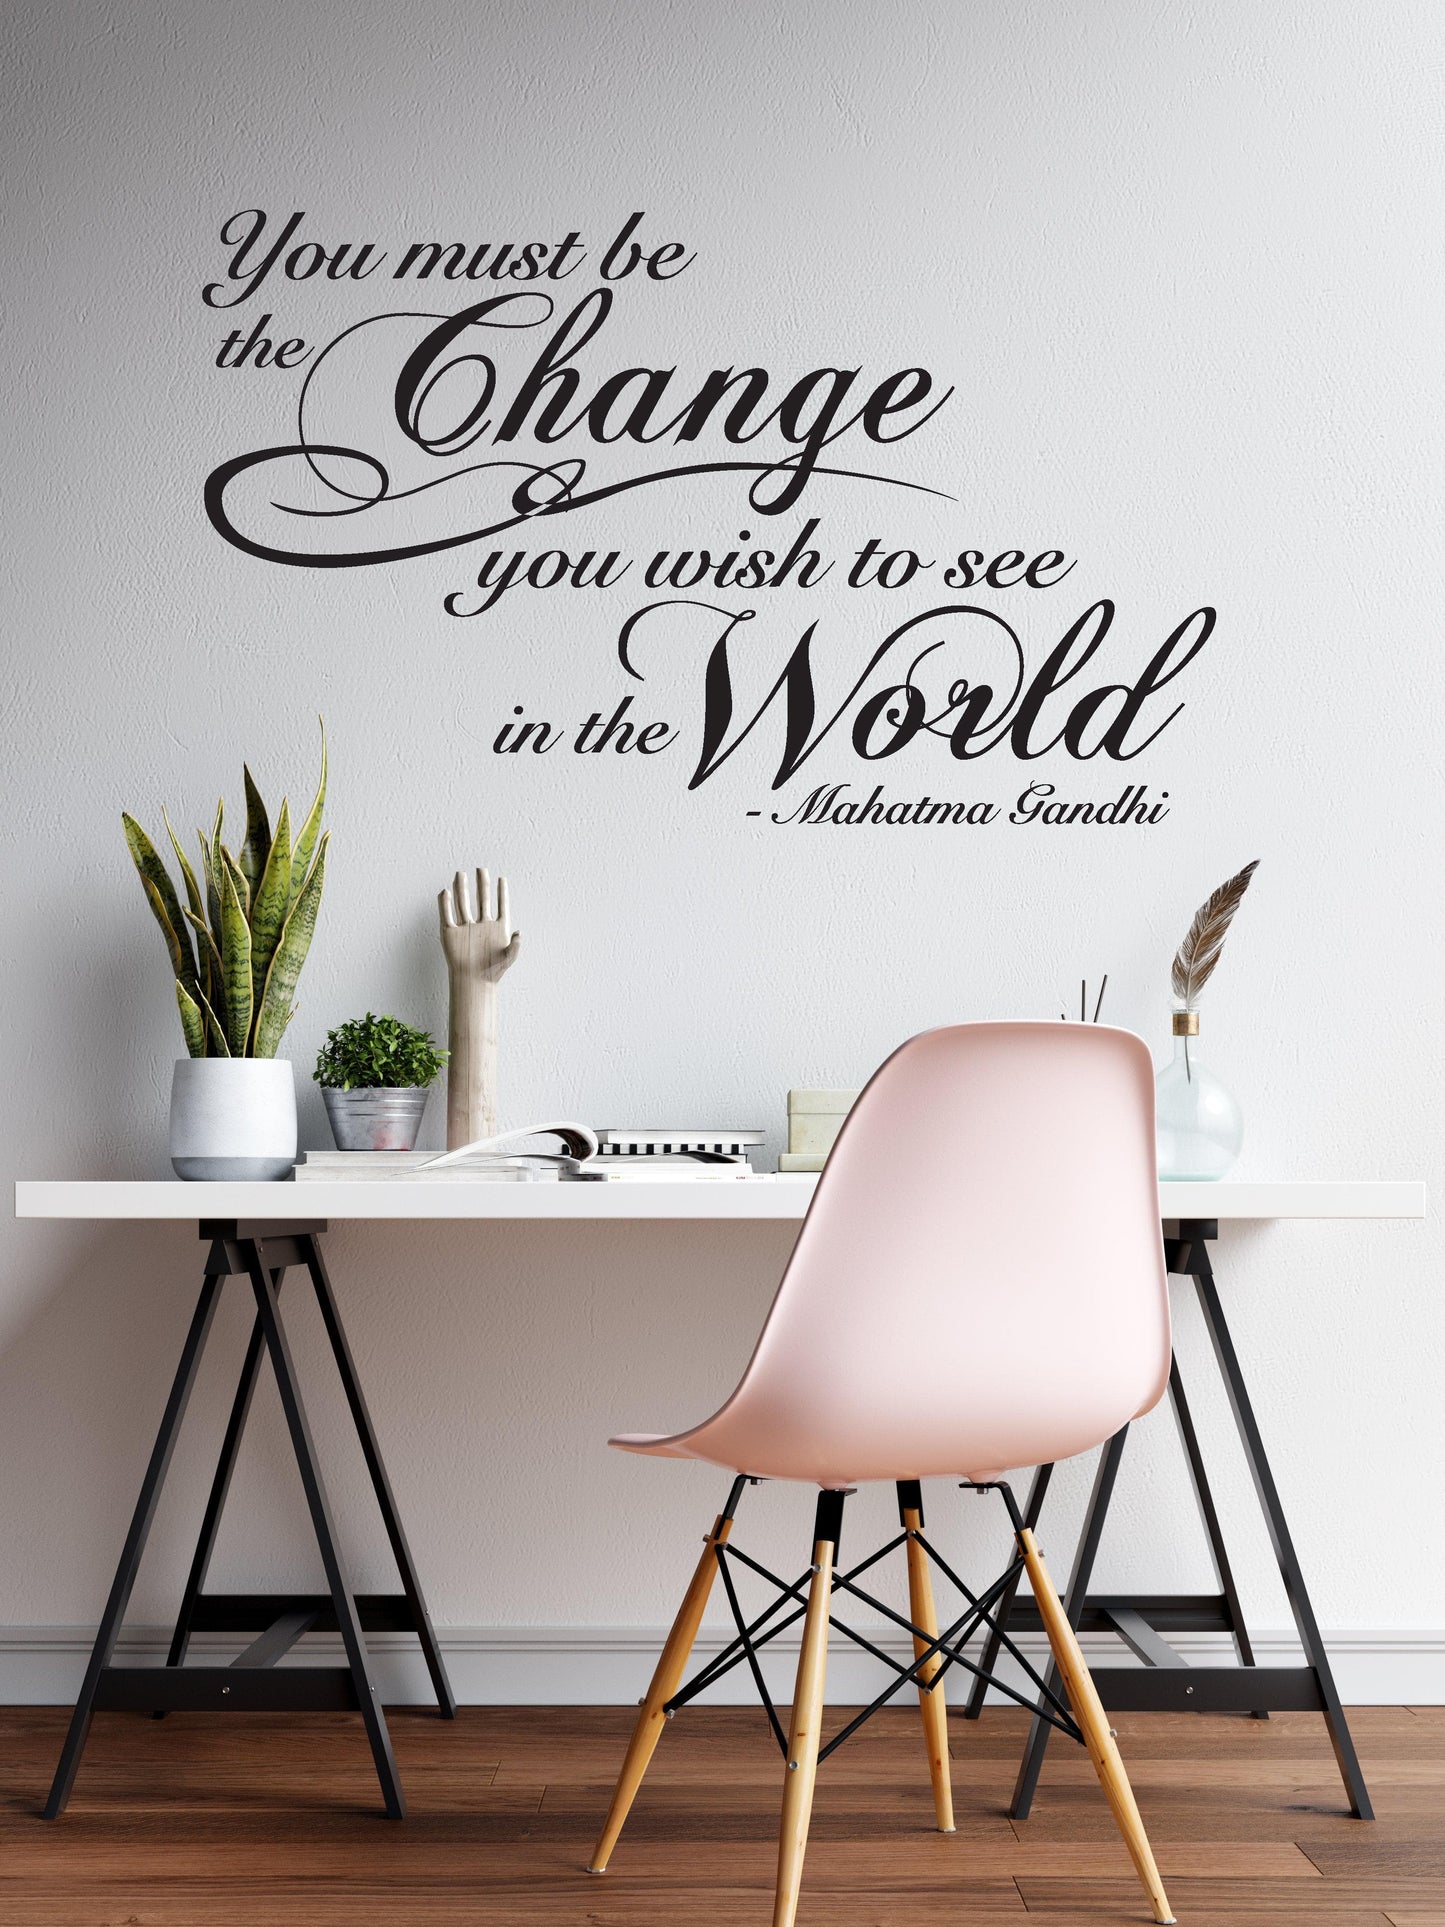 You Must be the Change you wish to see in the world by Gandhi. Motivational Quote Wall Decal. #P101